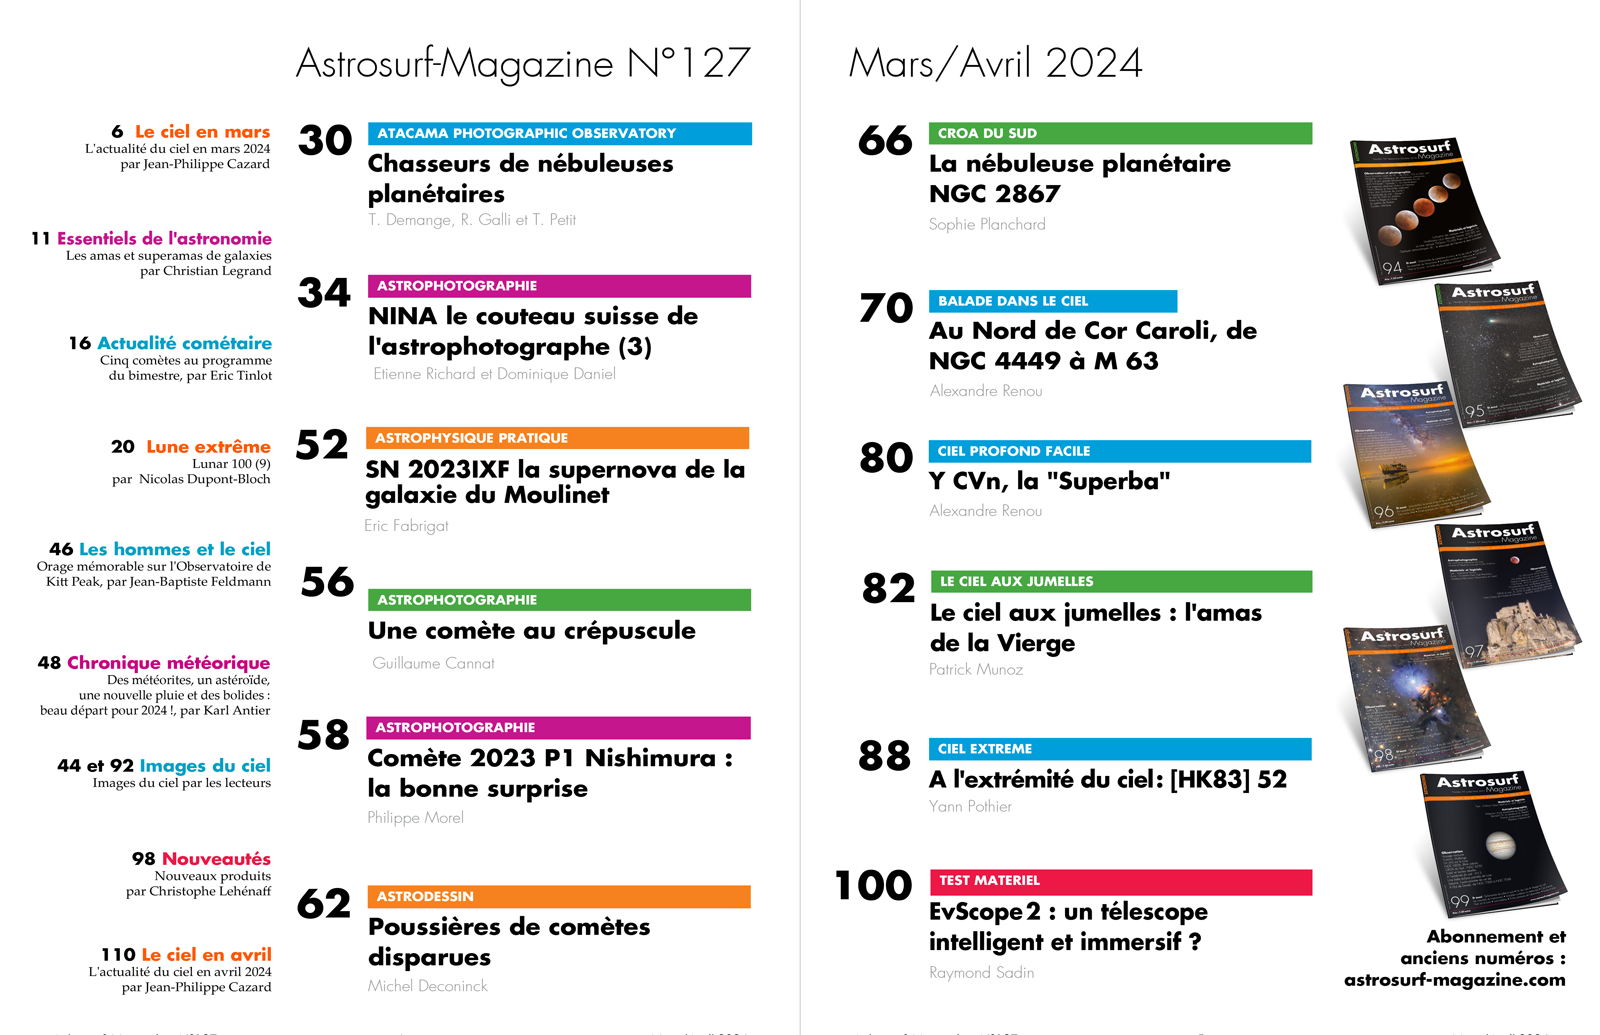 ASM127_Sommaire_1600.png.e6338c13f163fe521bb0532642372d00.png